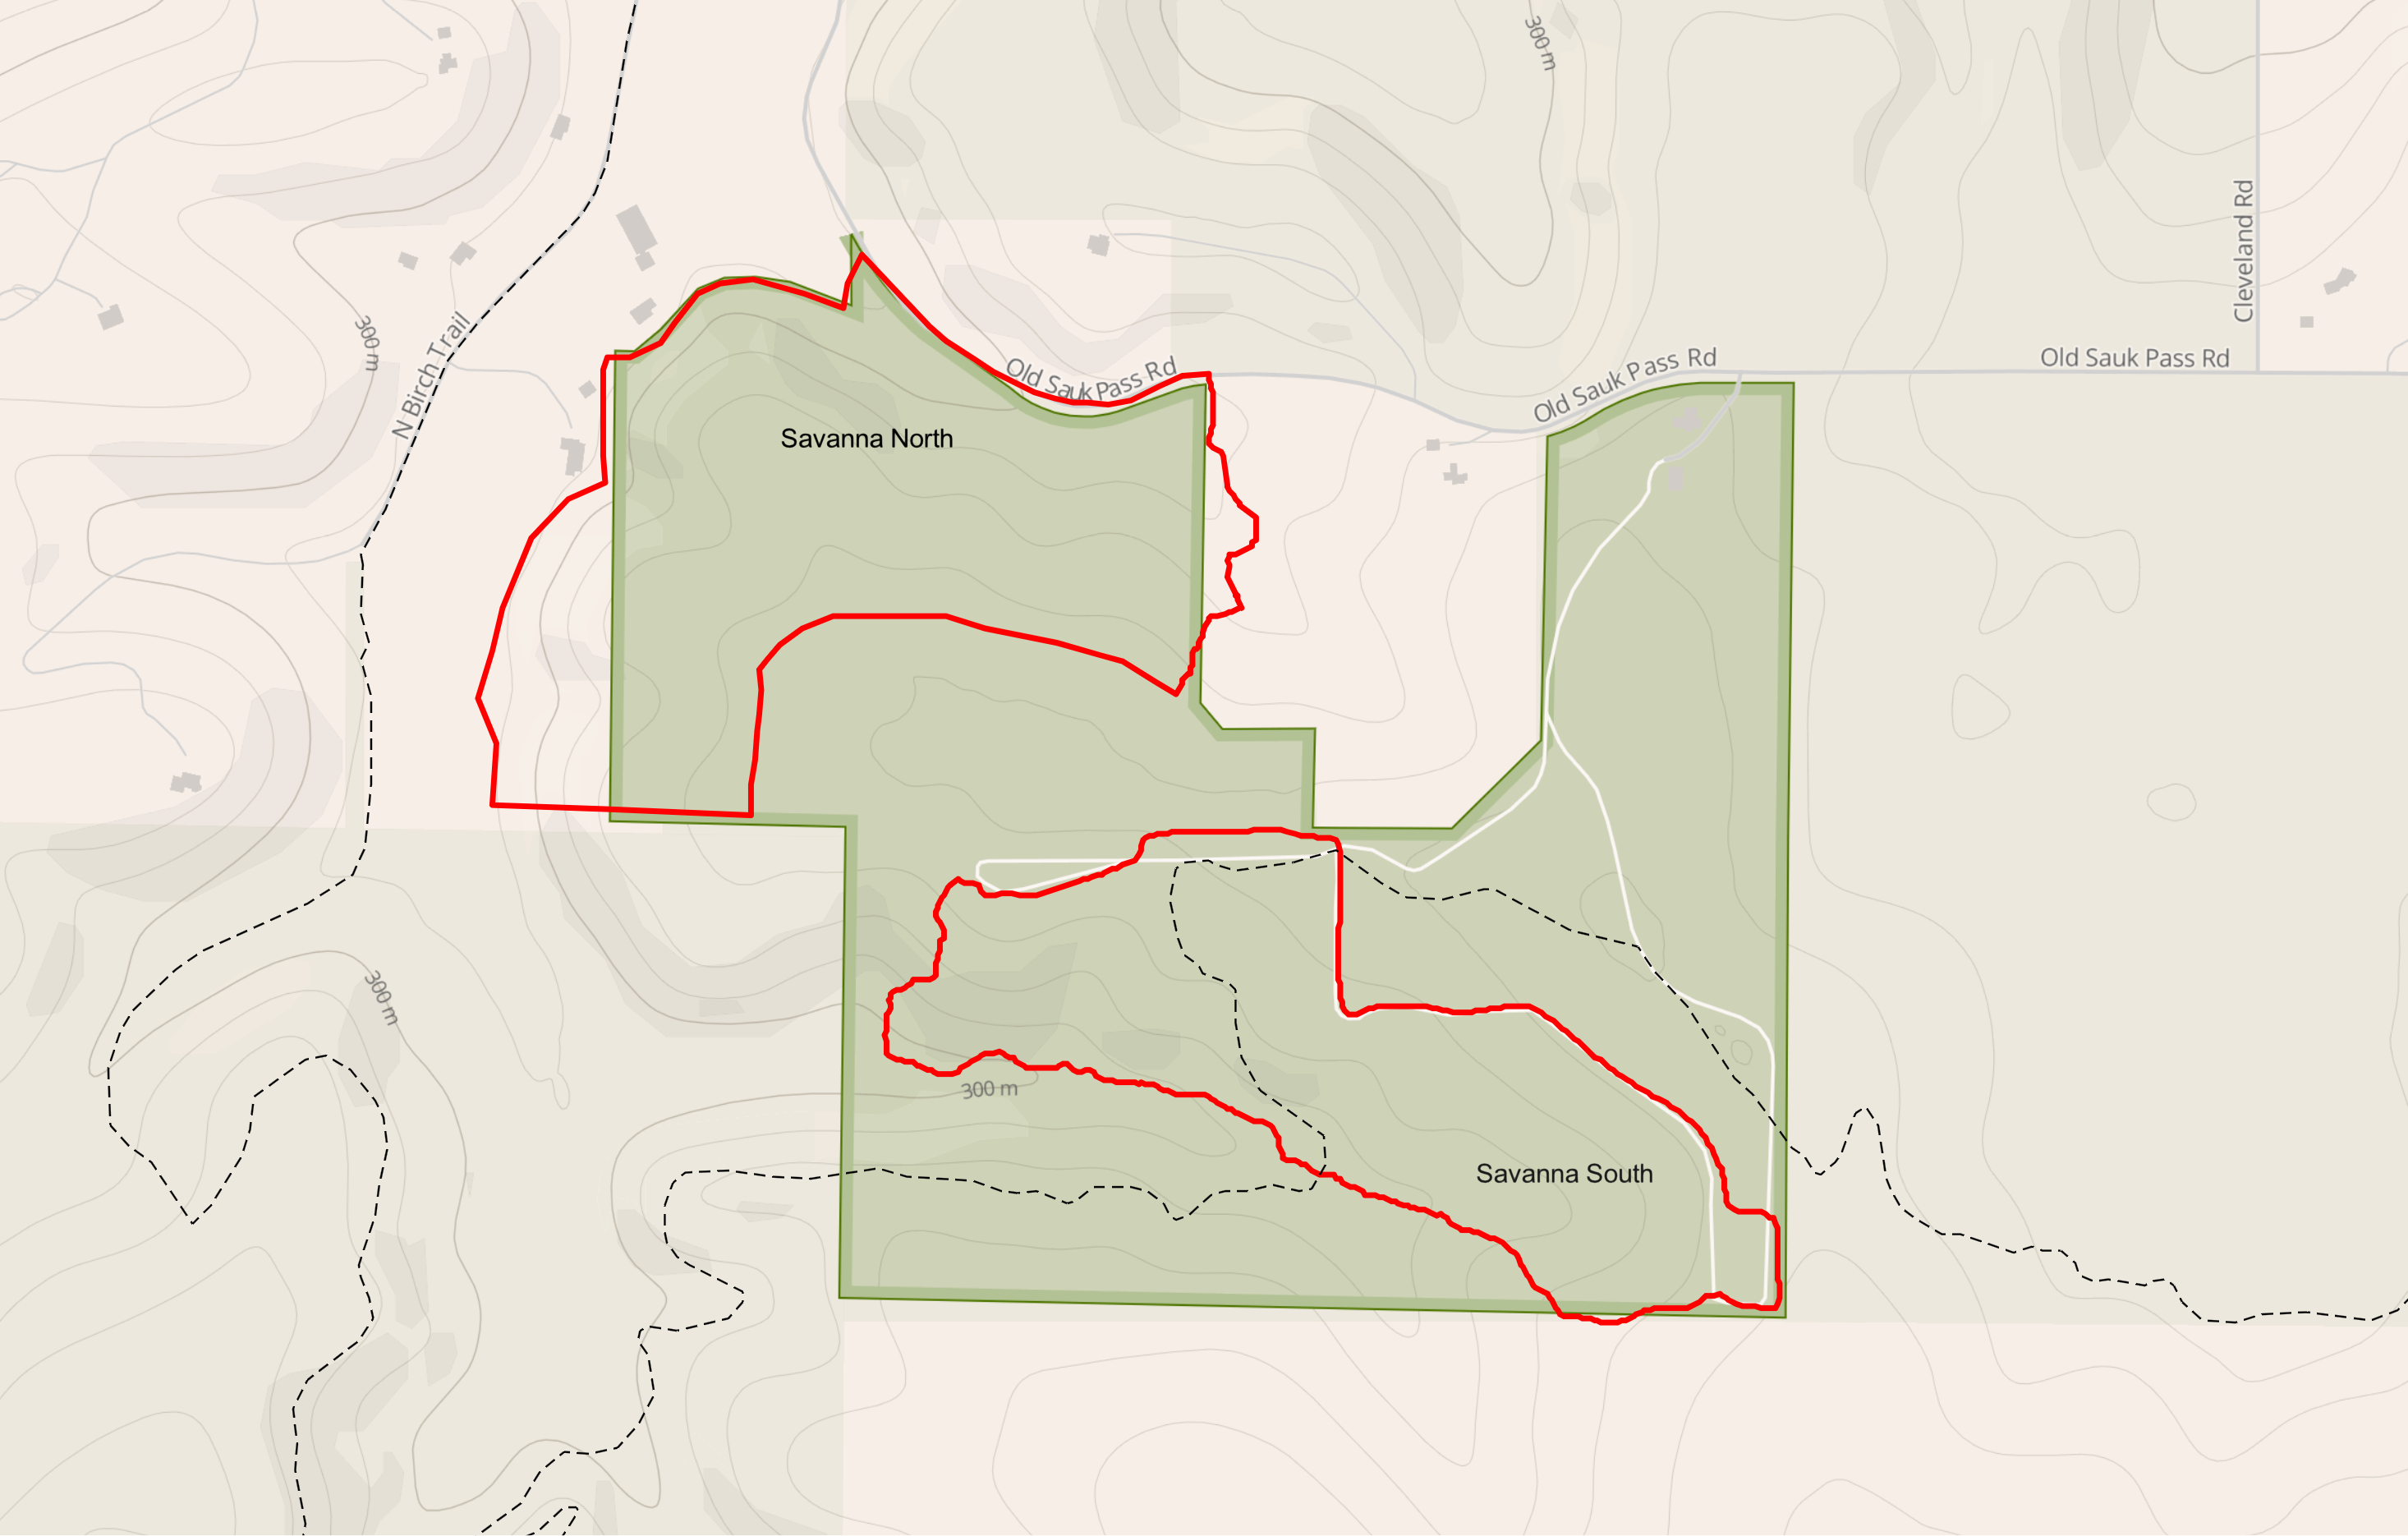 NPS map showing prescribed fire perimeters in red